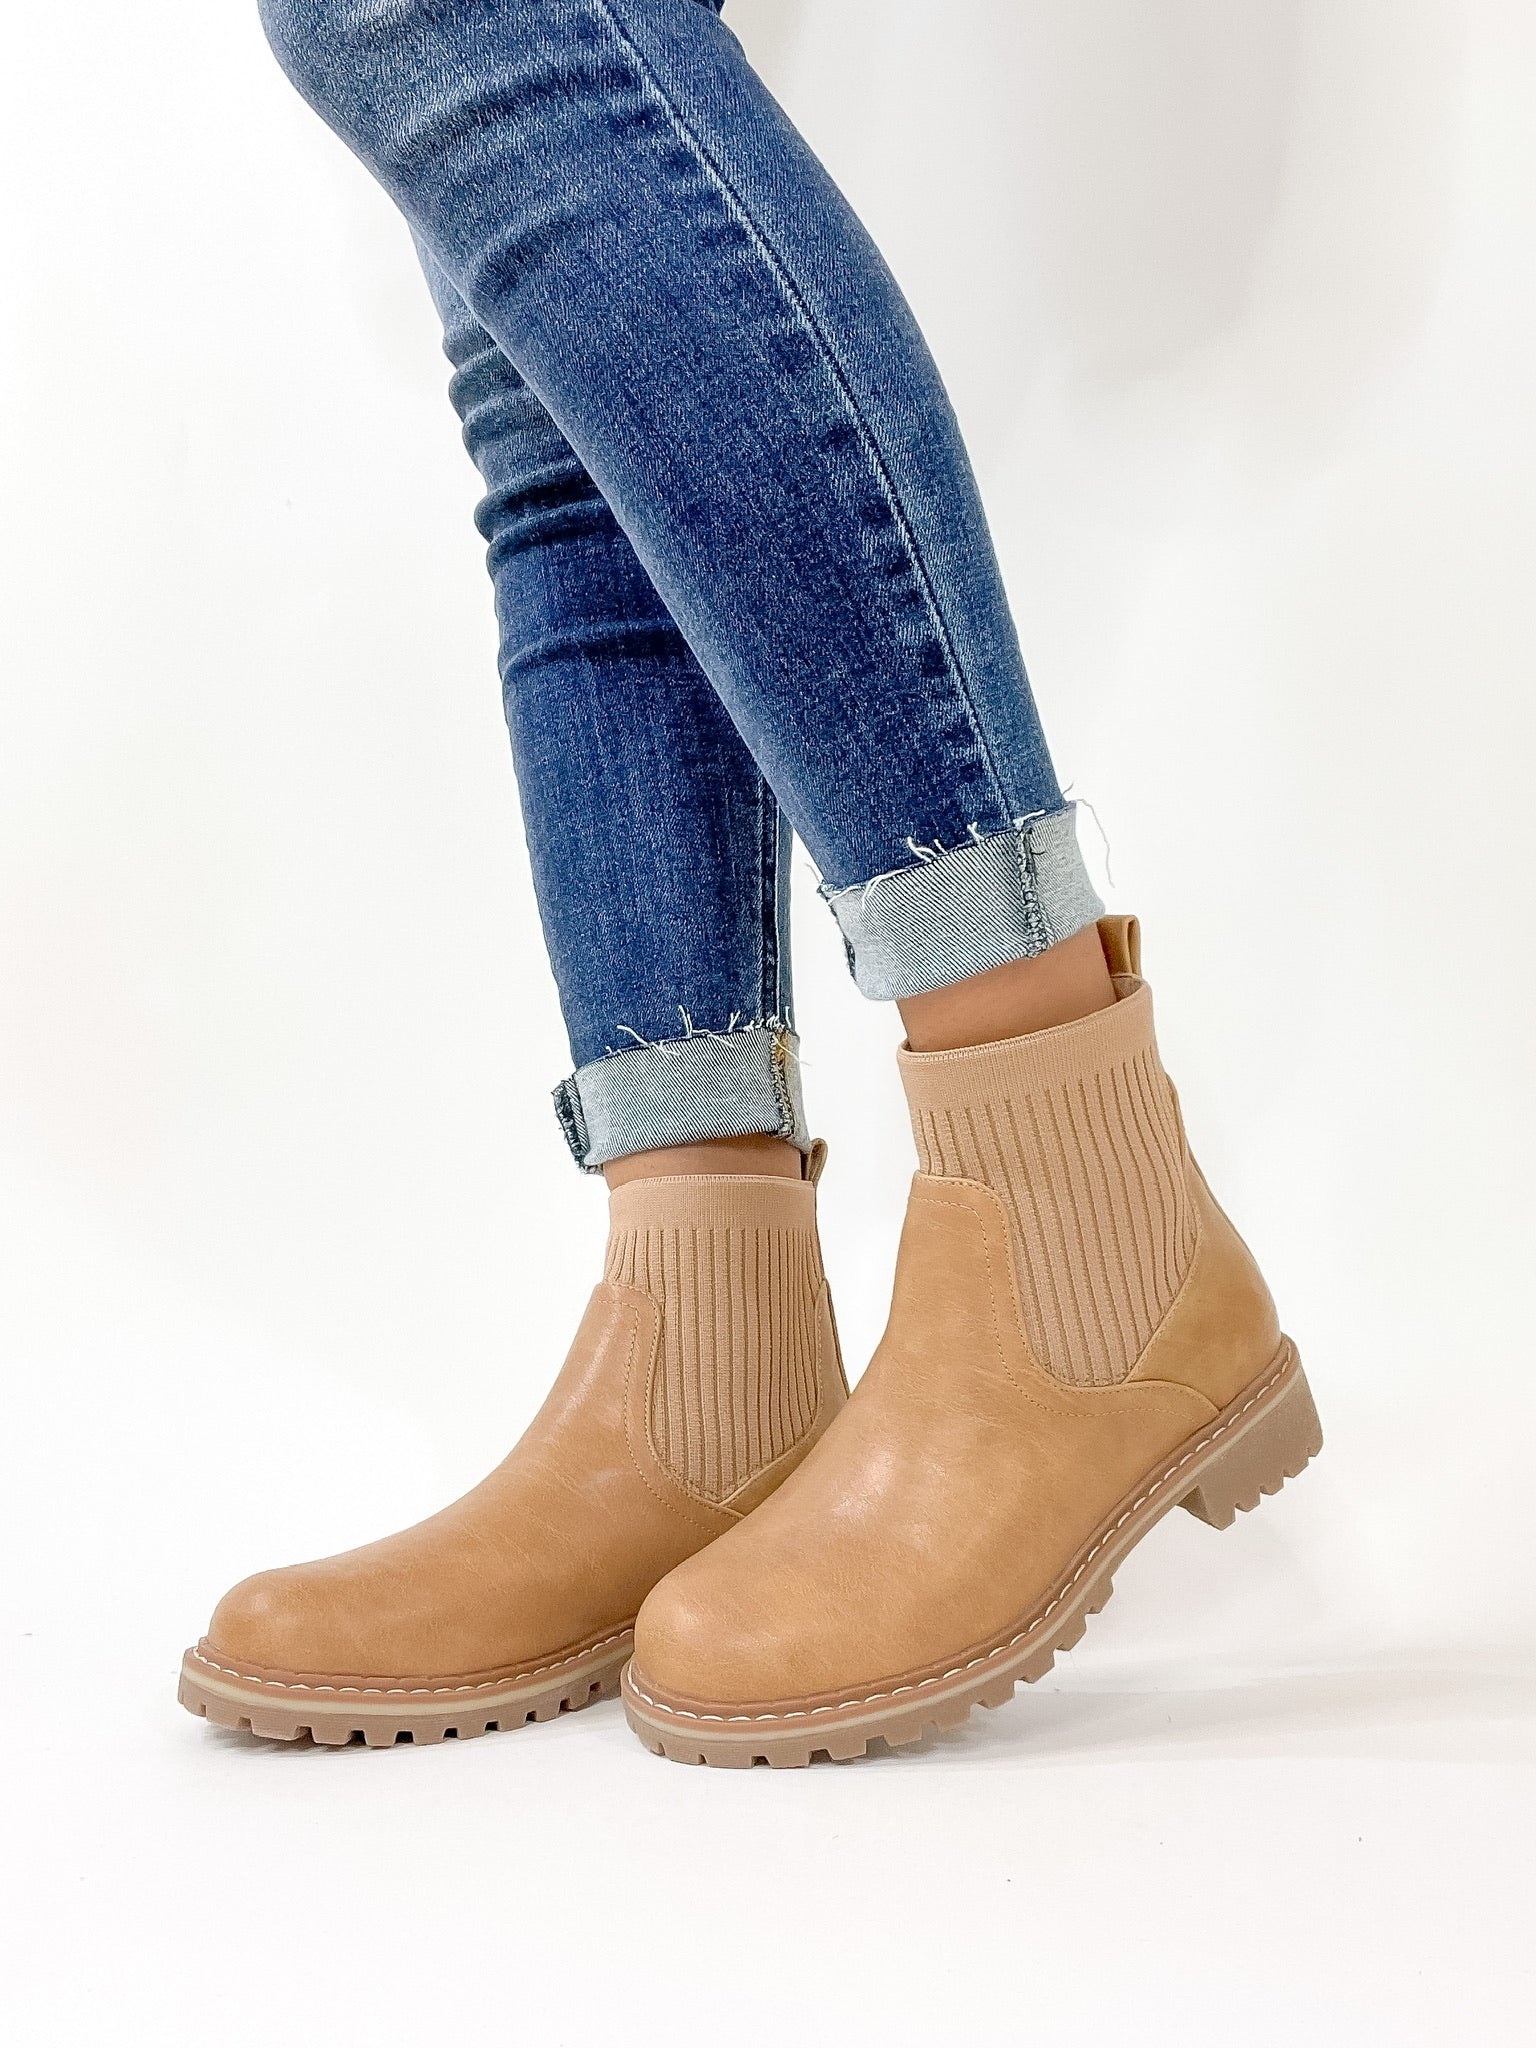 Corky's | Cabin Fever Slip On Booties in Caramel Tan - Giddy Up Glamour Boutique